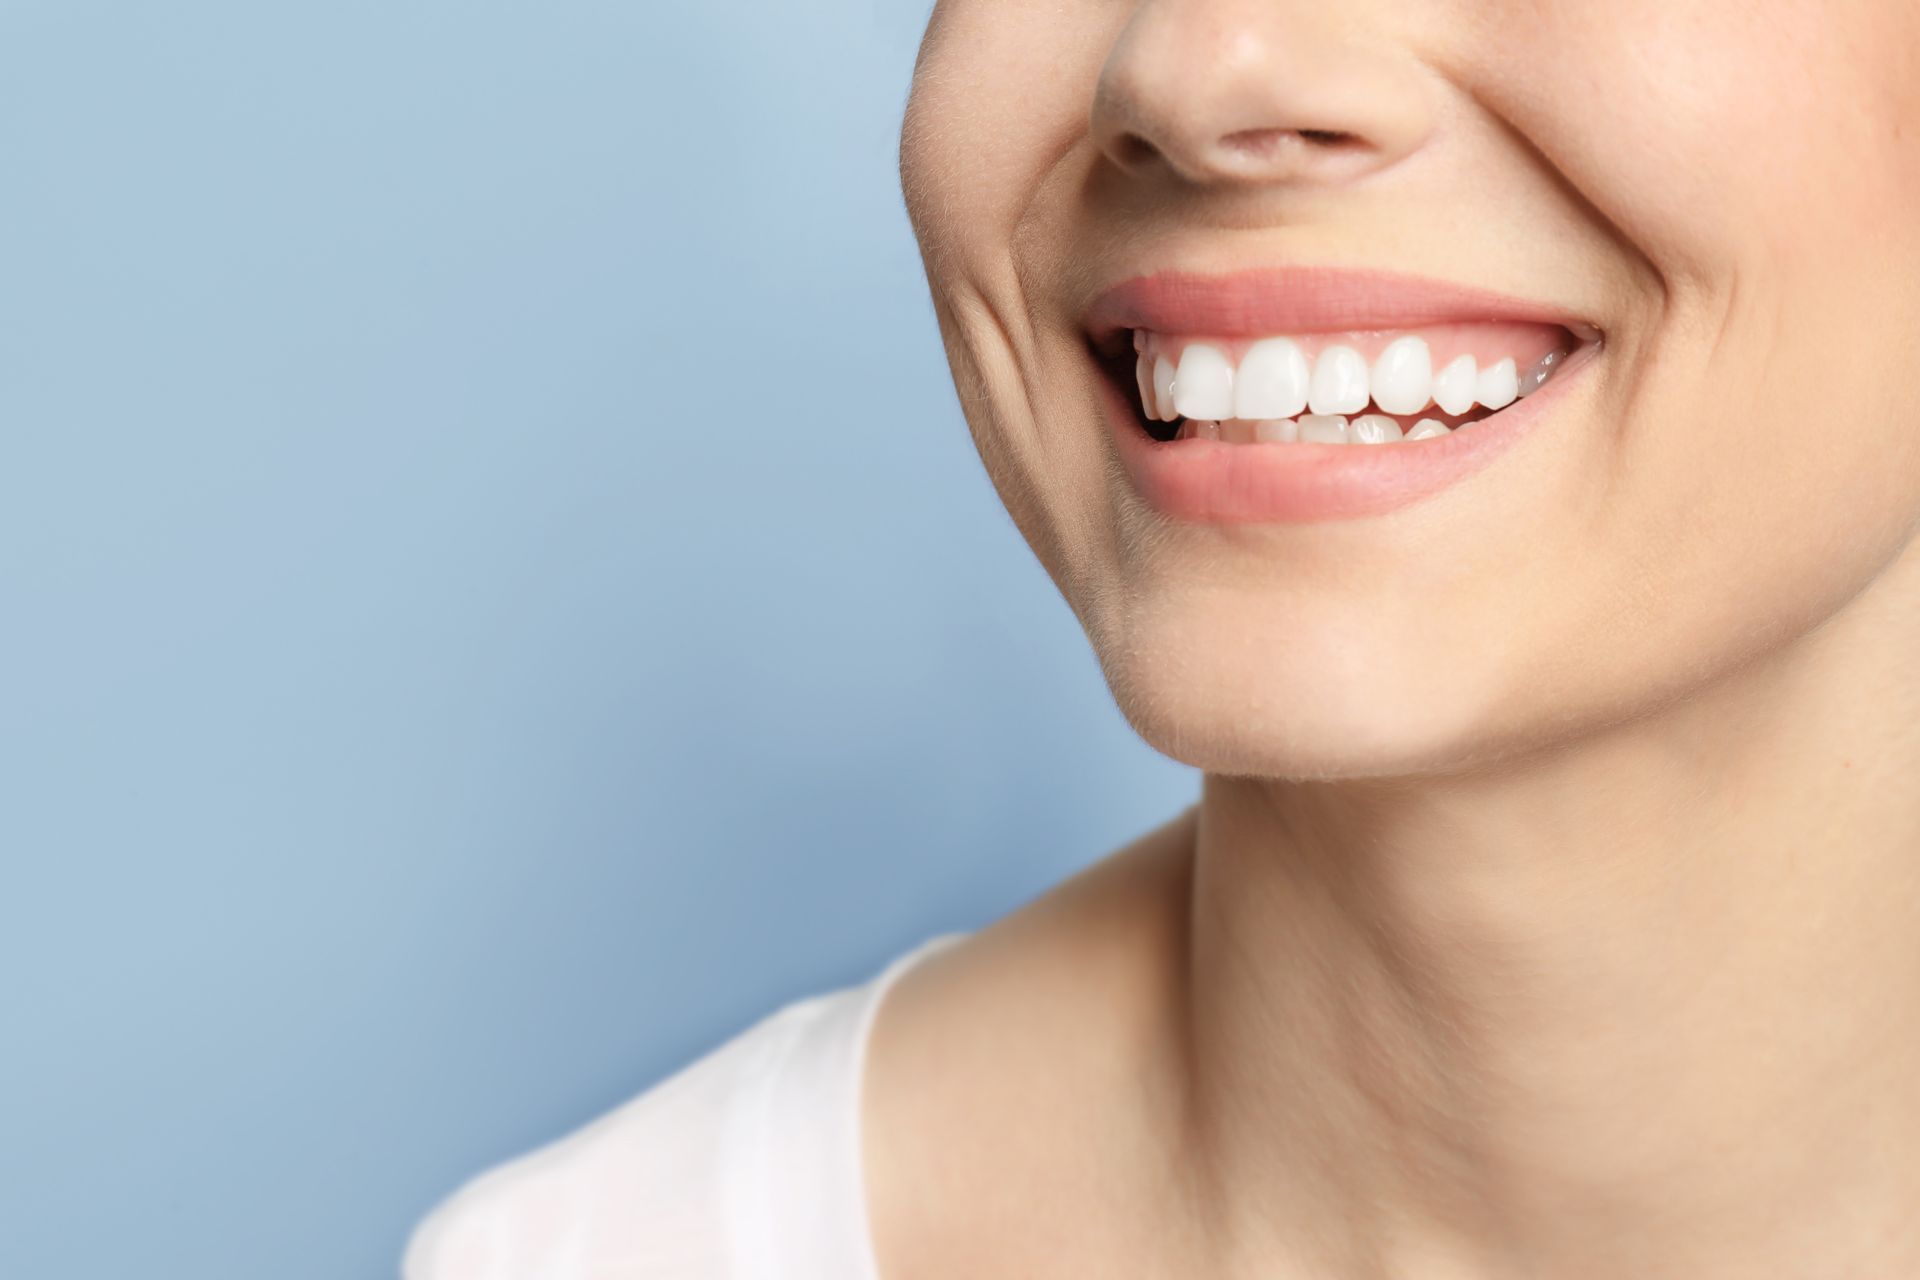 A close up of a woman 's smile with white teeth on a blue background.